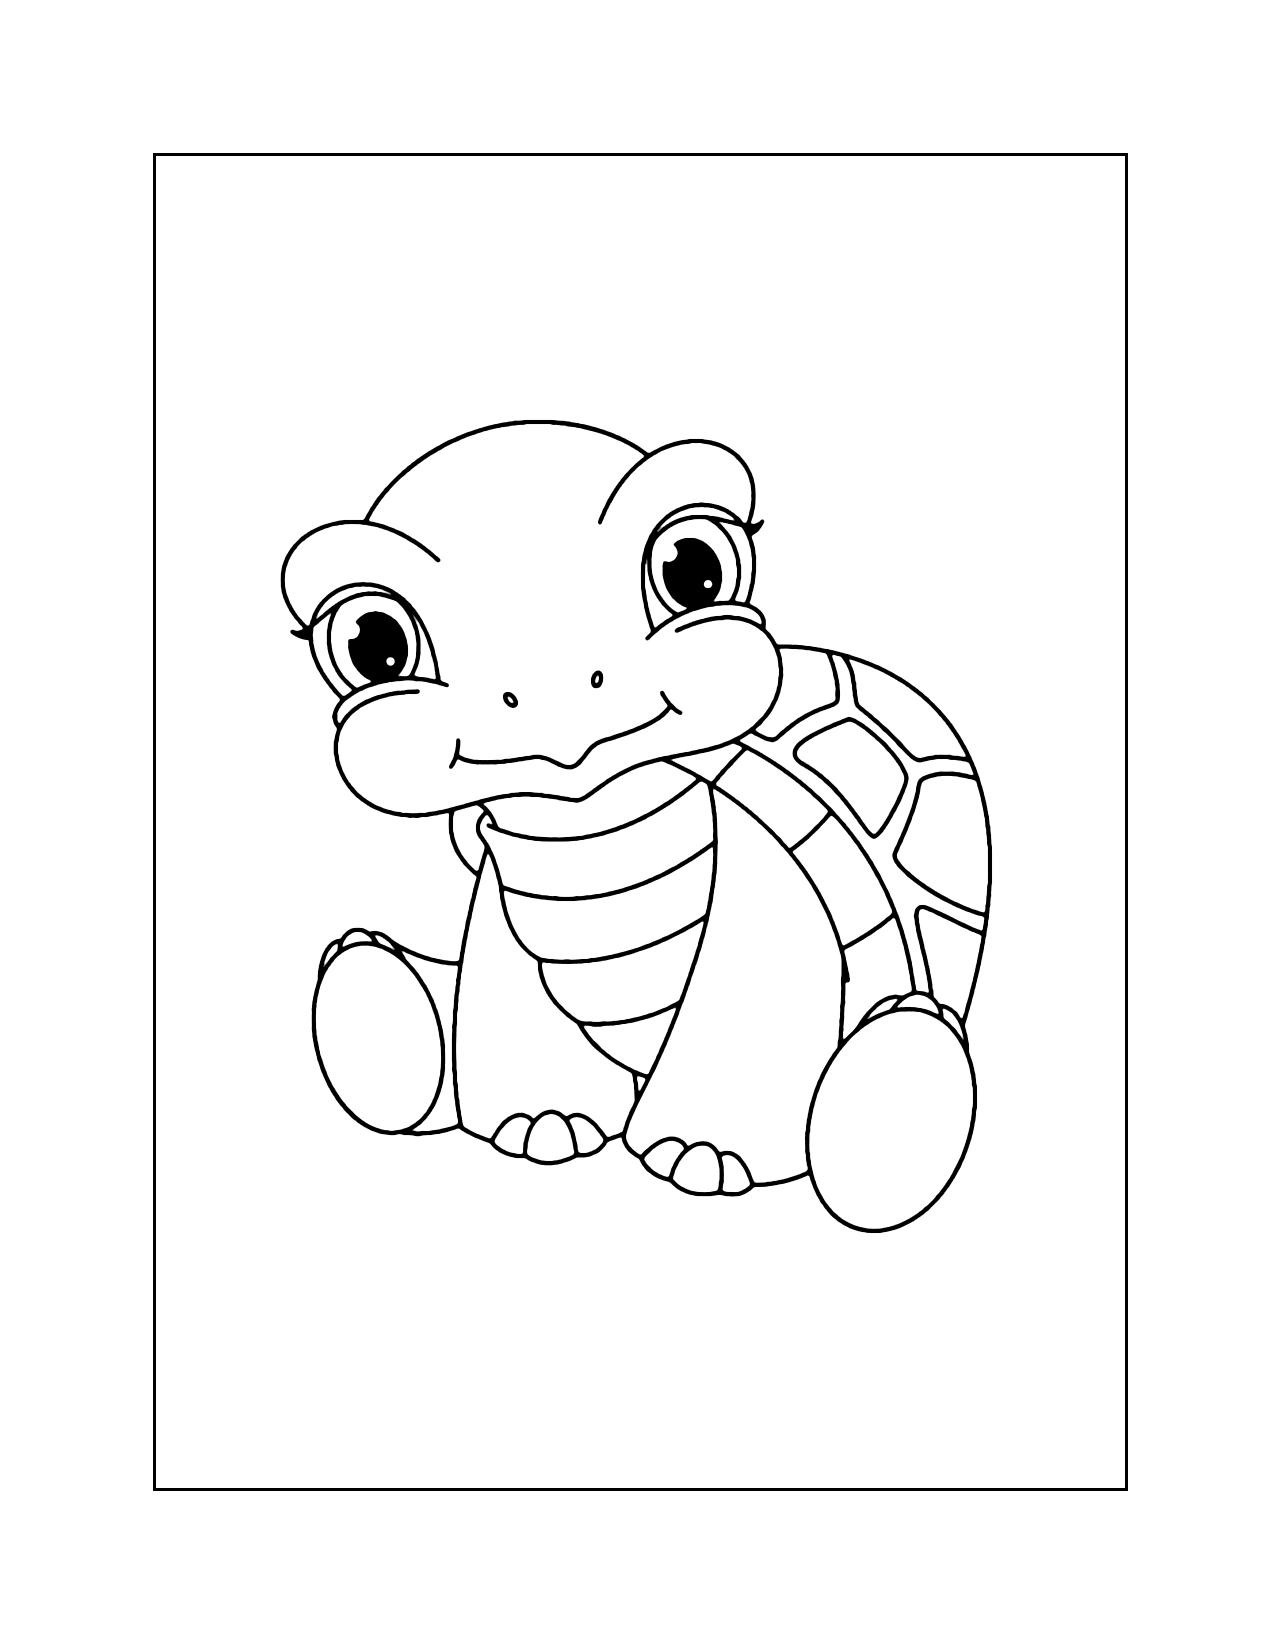 Cute Turtle Sitting Coloring Page